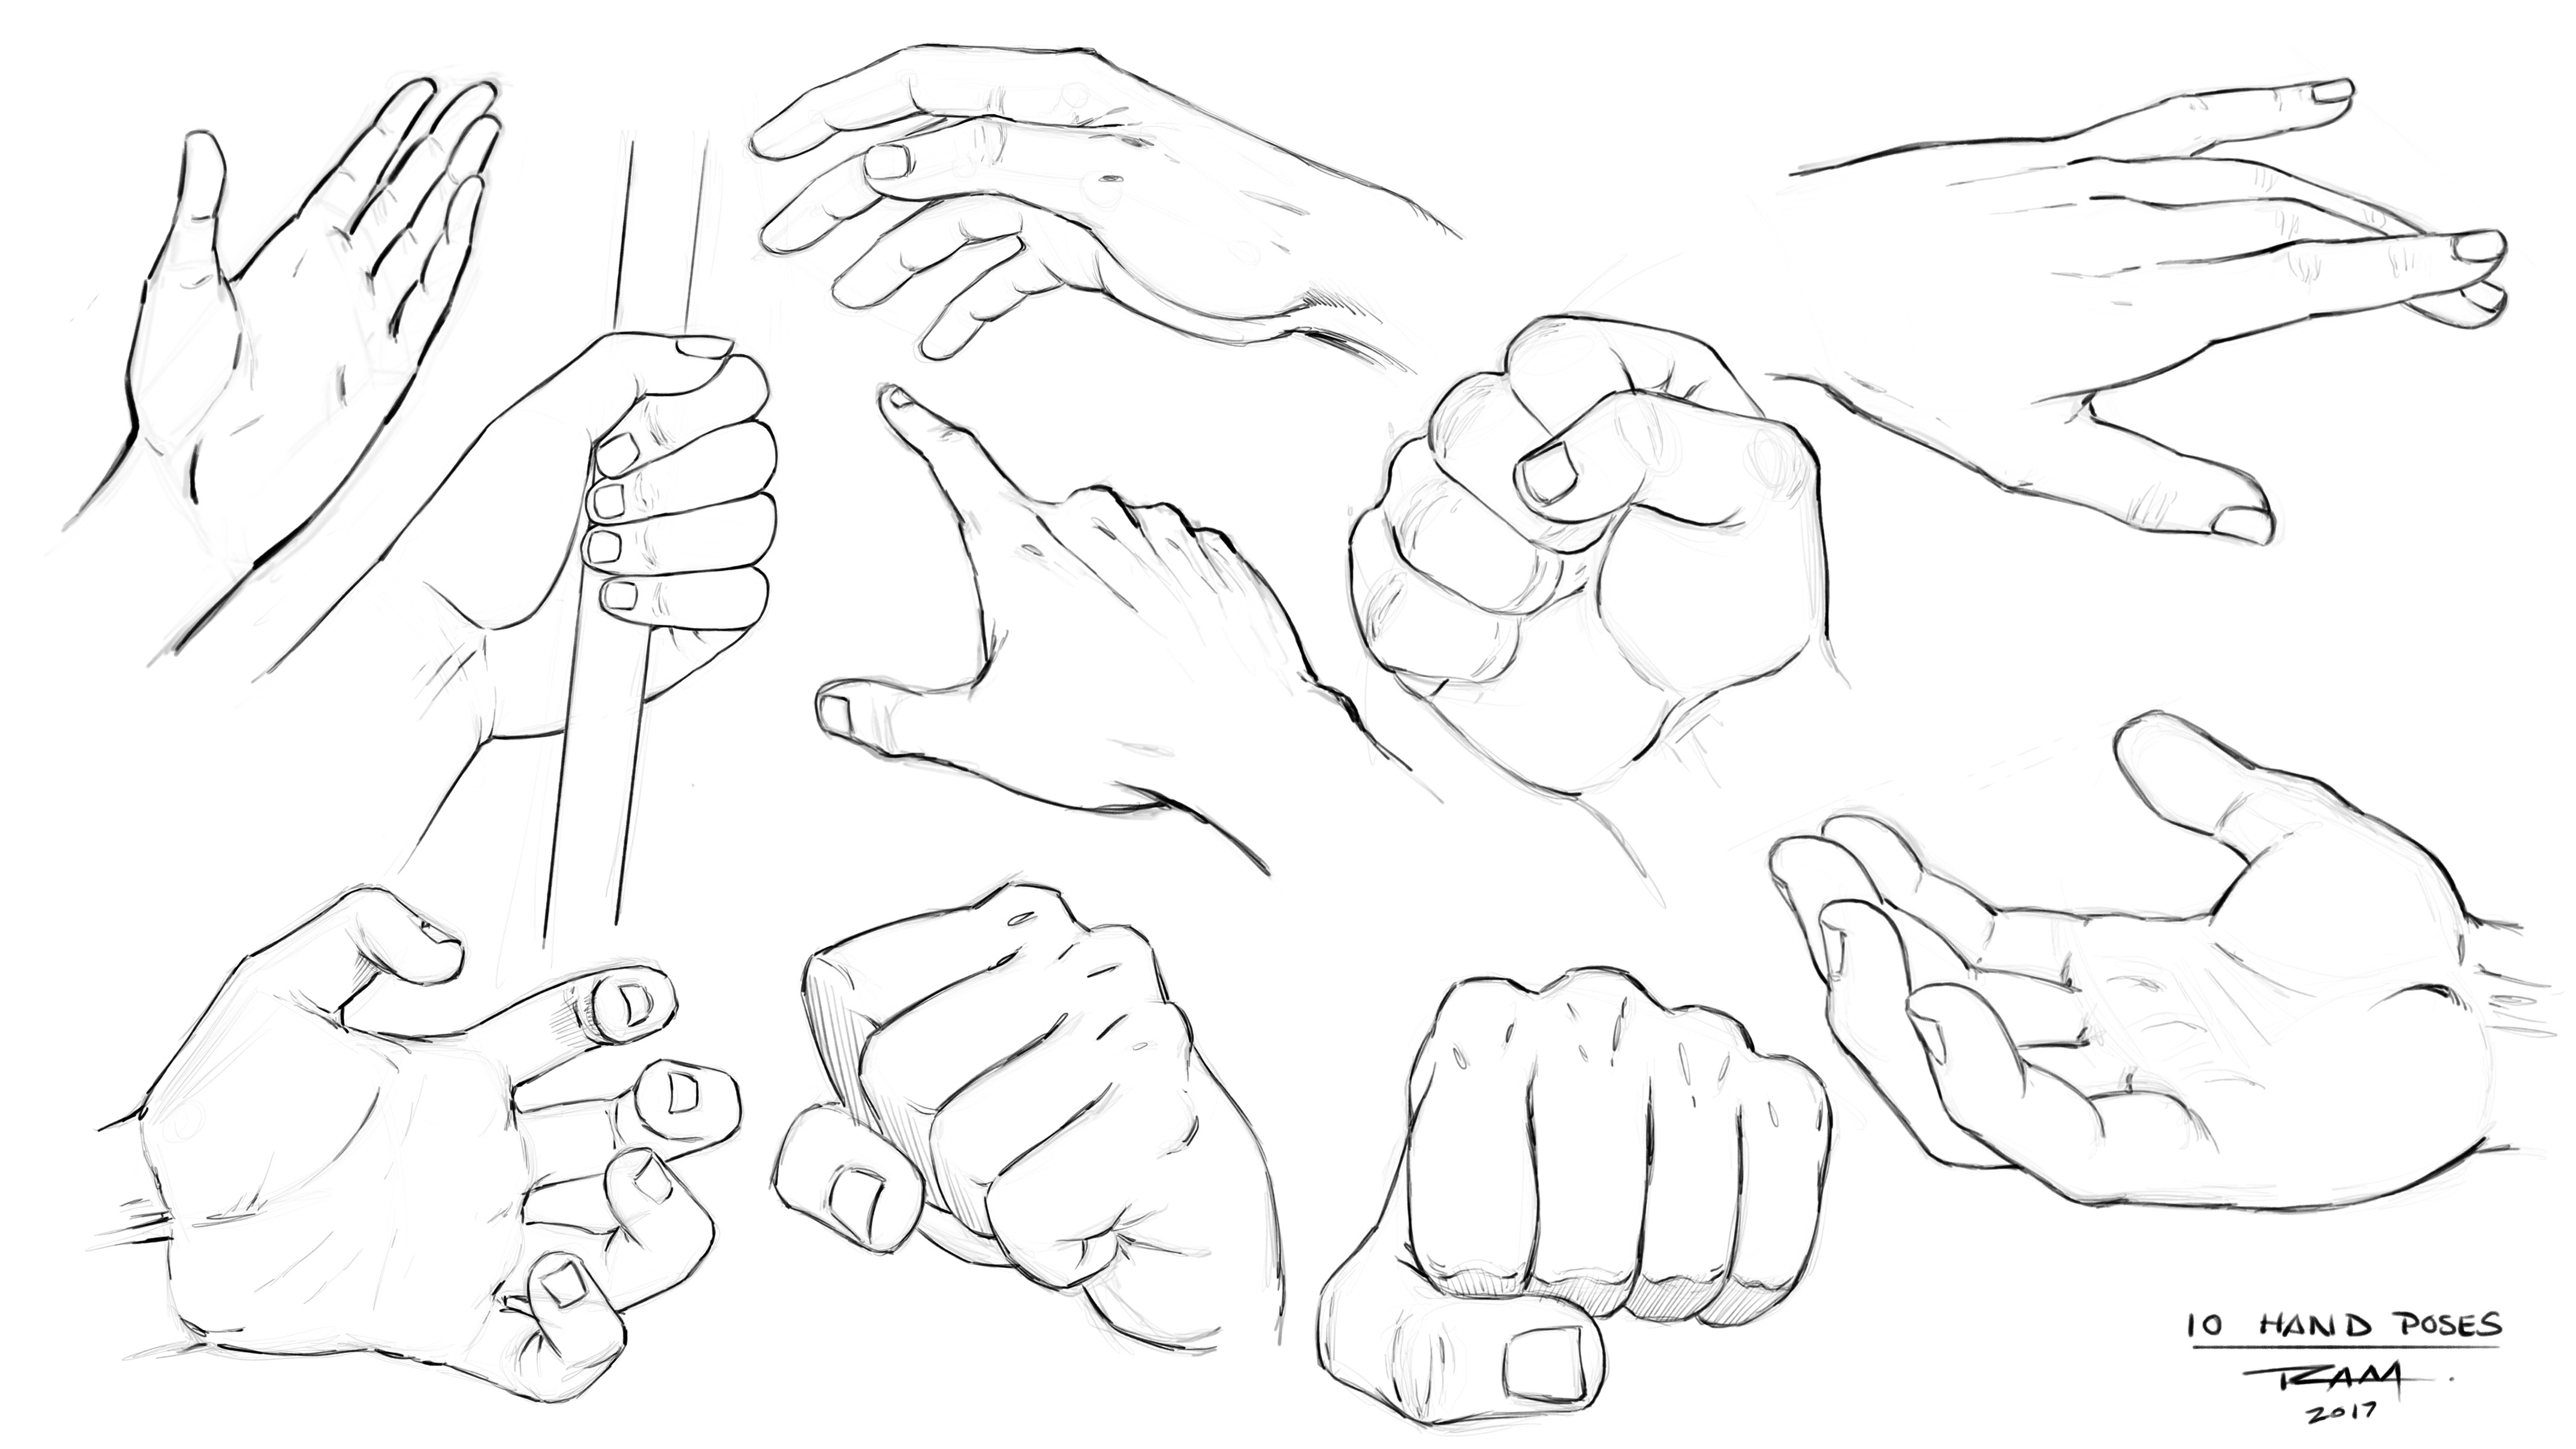 How to Draw Dynamic Hand Poses - Step by Step